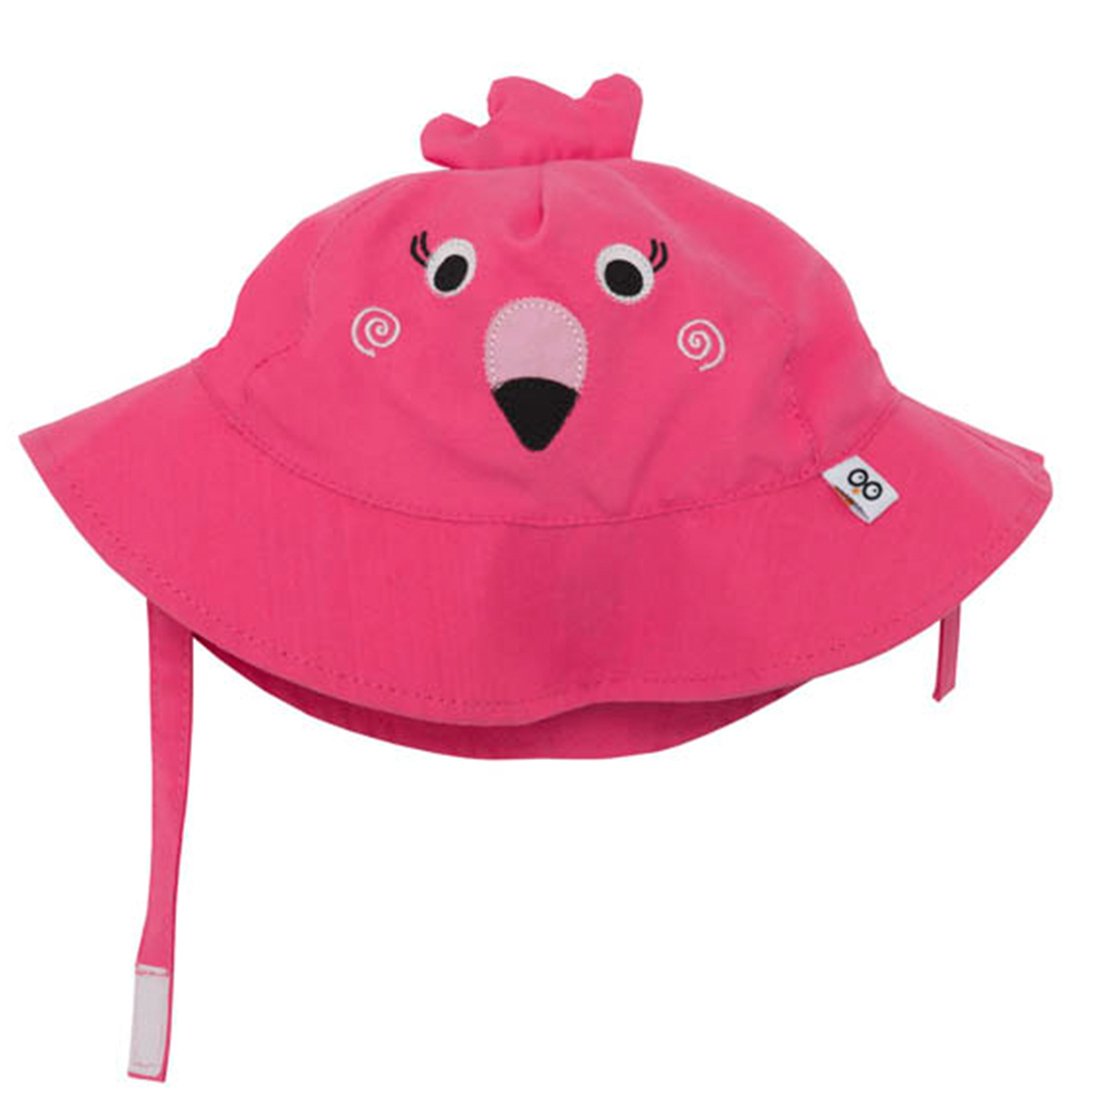 Baby/Toddler Sun Hat - Franny the Flamingo